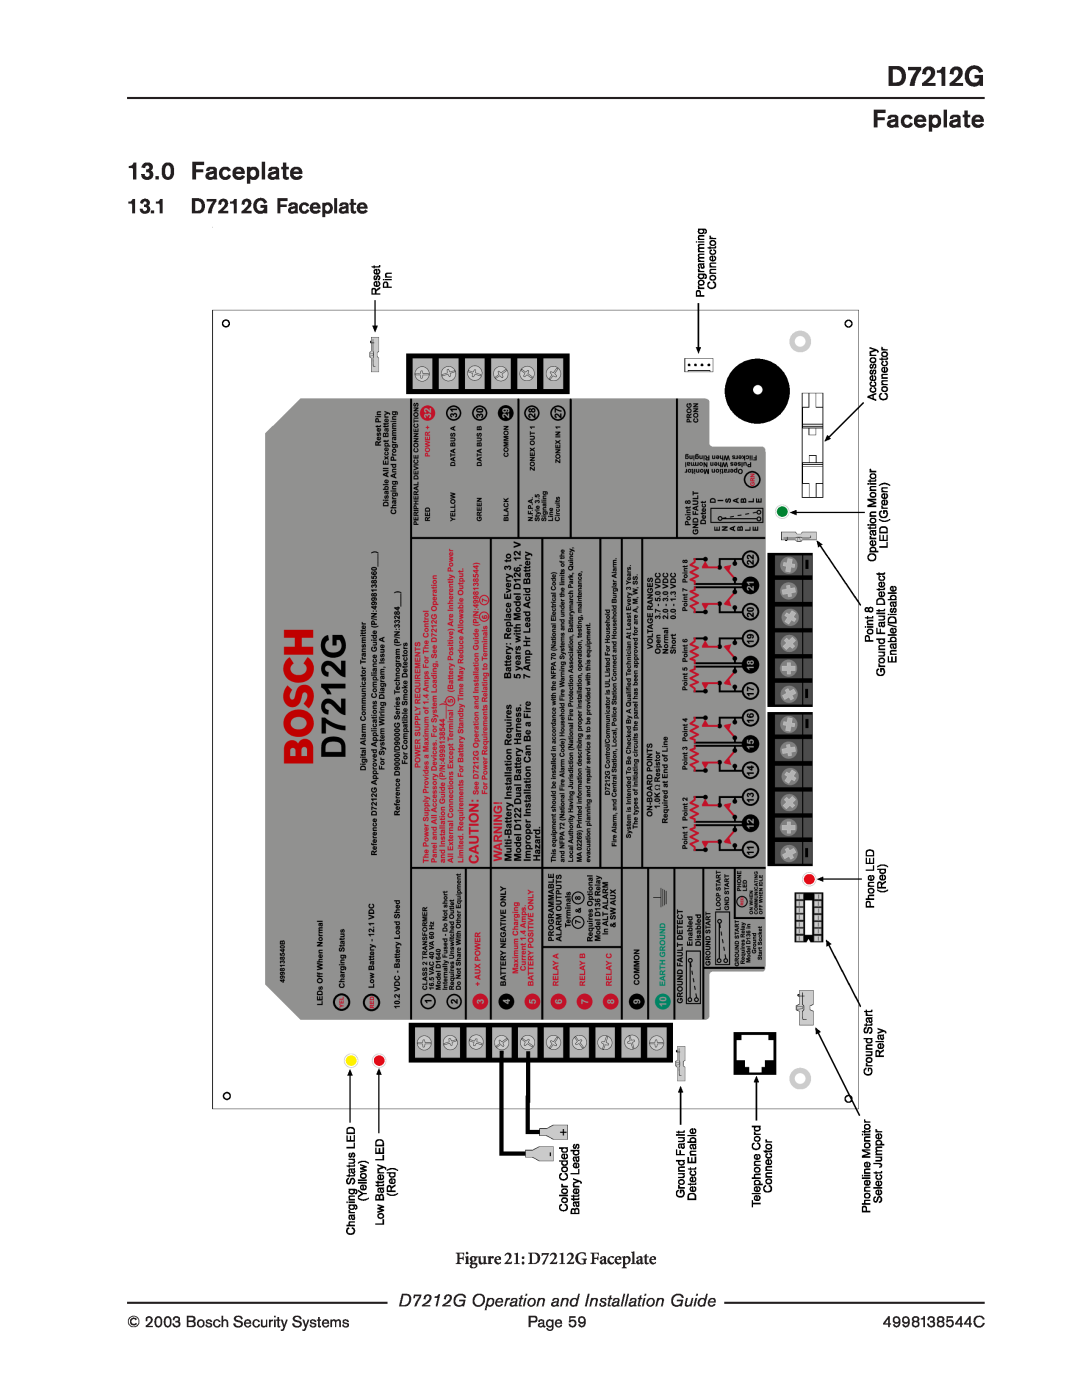 Bosch Appliances manual 13.0, 13.1, D7212G Faceplate, D7212G Operation and Installation Guide 